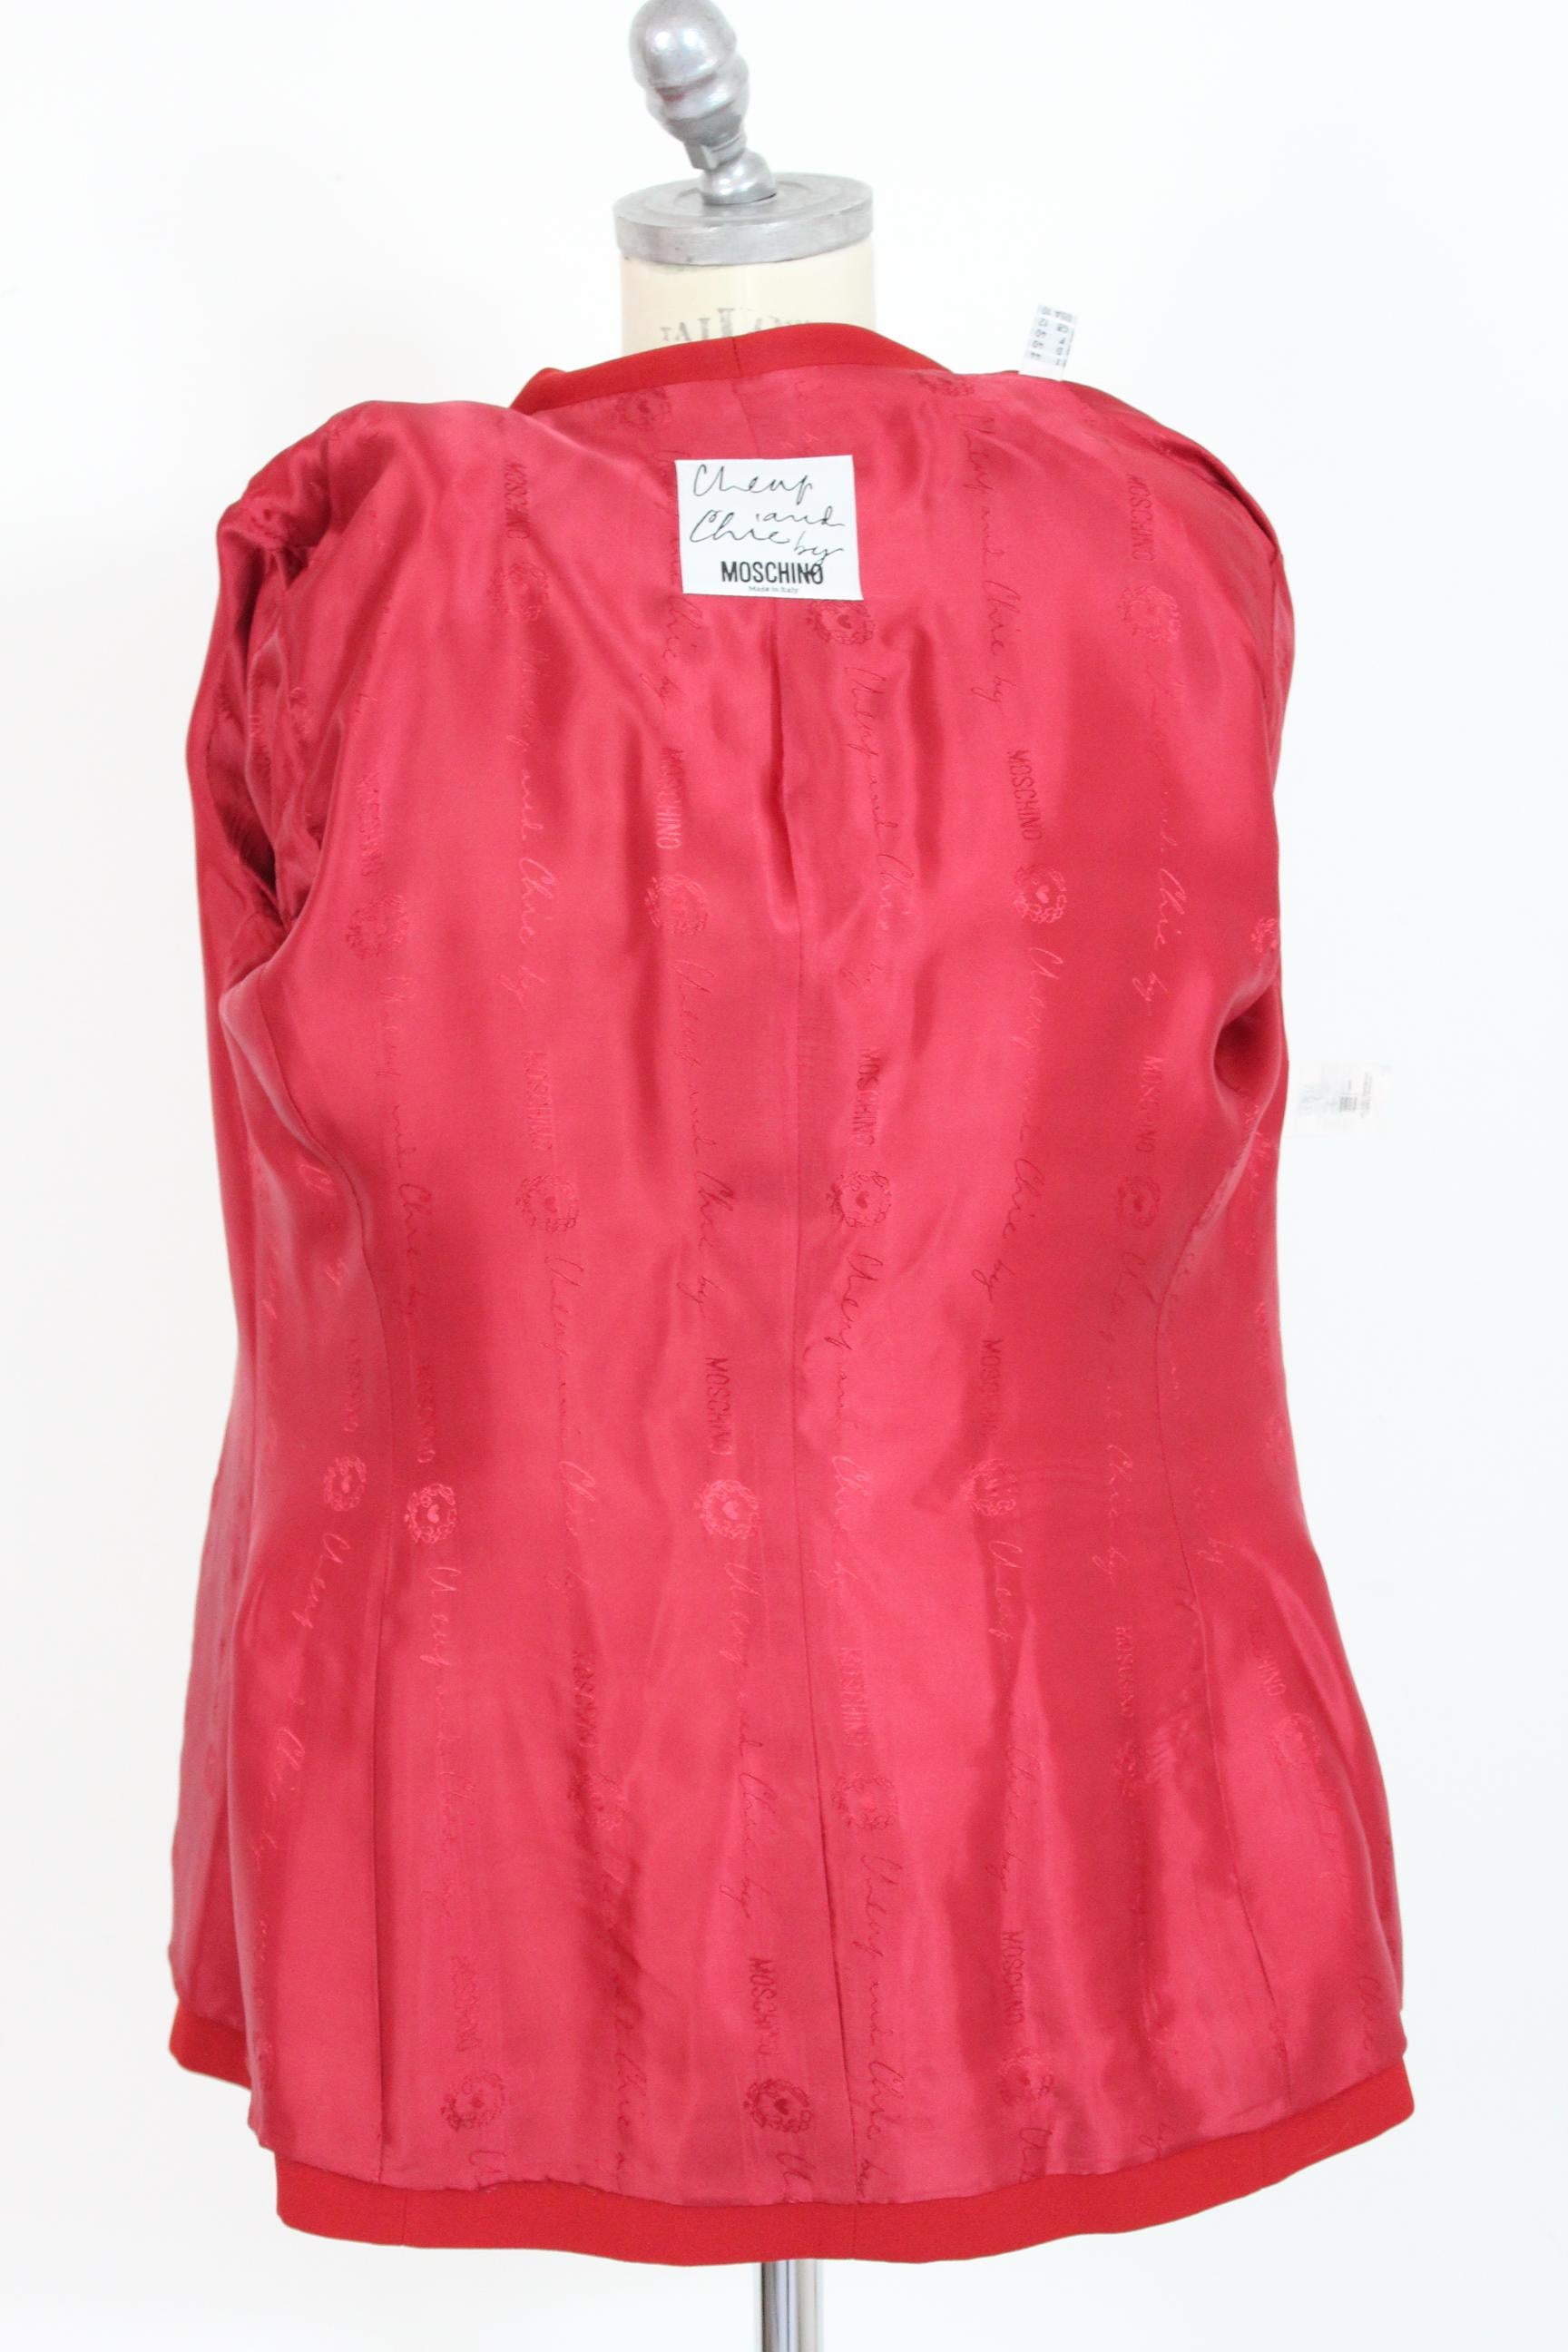 Moschino Cheap And Chic Red Satin Flared Tuxedo Jacket 1990s 1